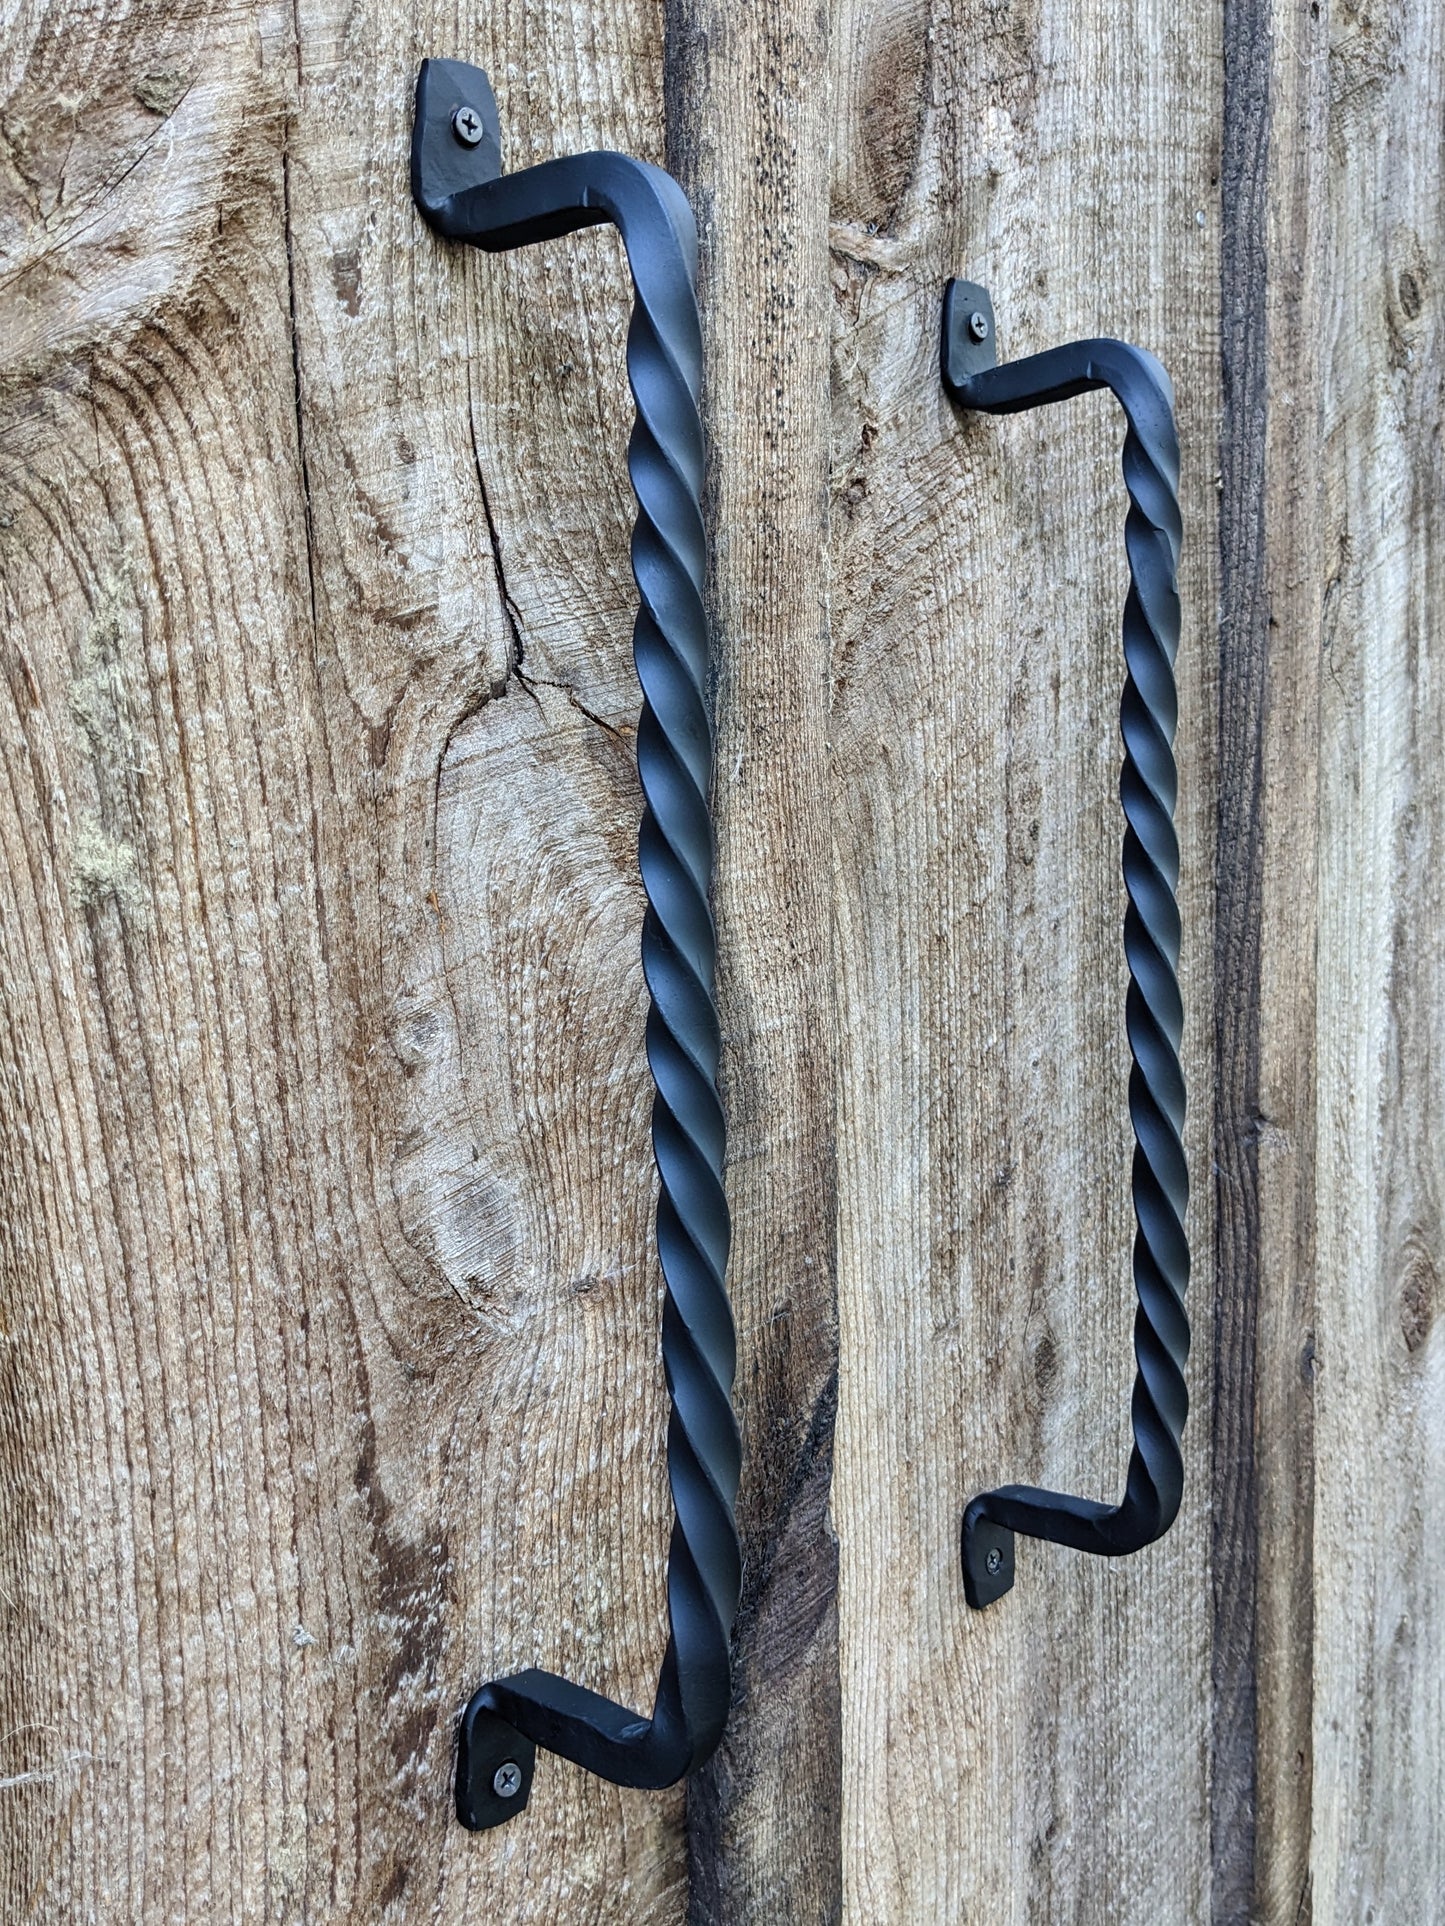 Set of 2 Large Twisted Hand Forged Handles, Door Pulls or Grab Bars